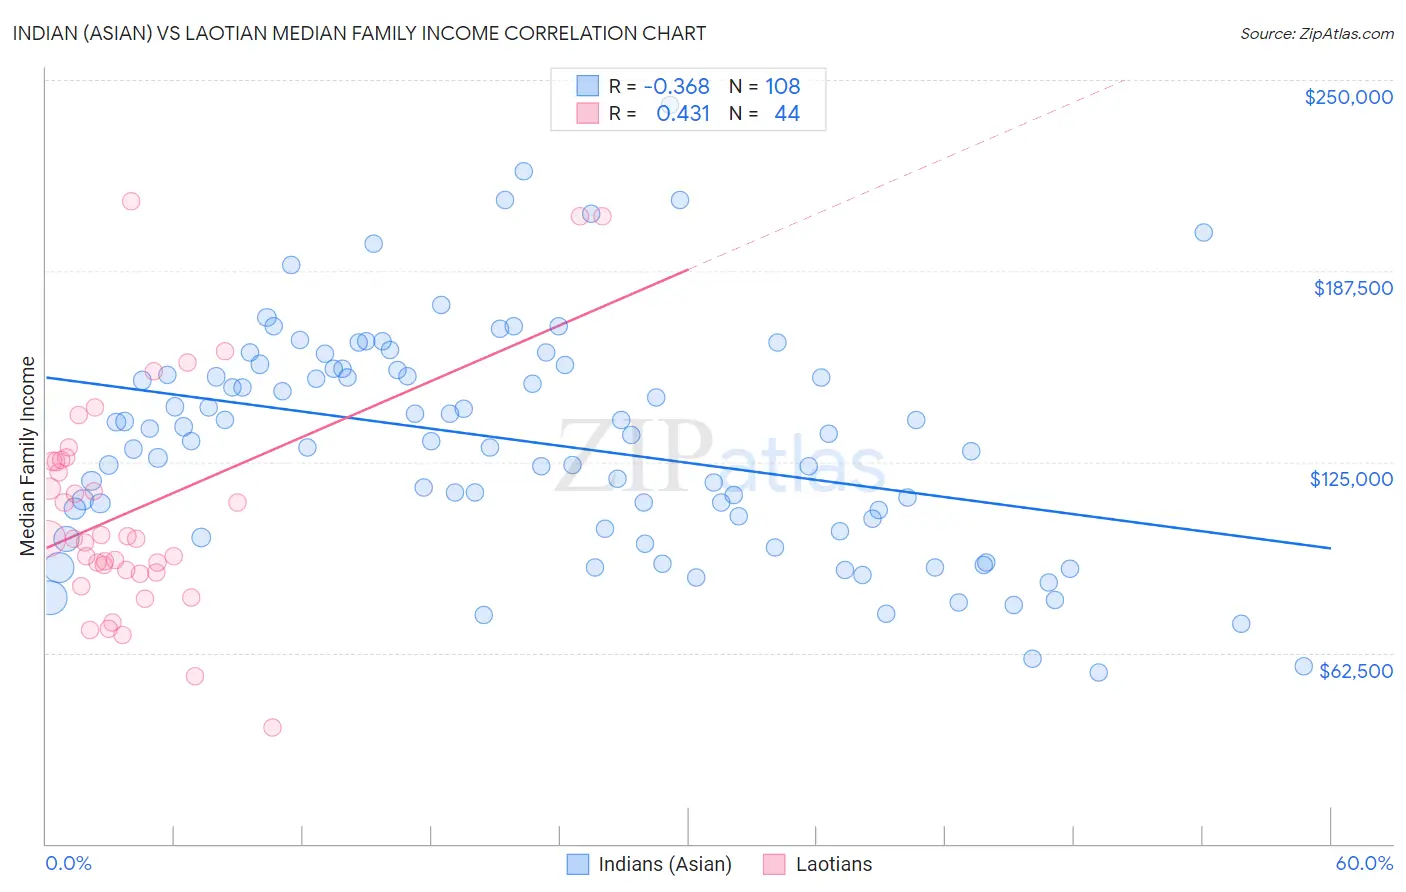 Indian (Asian) vs Laotian Median Family Income